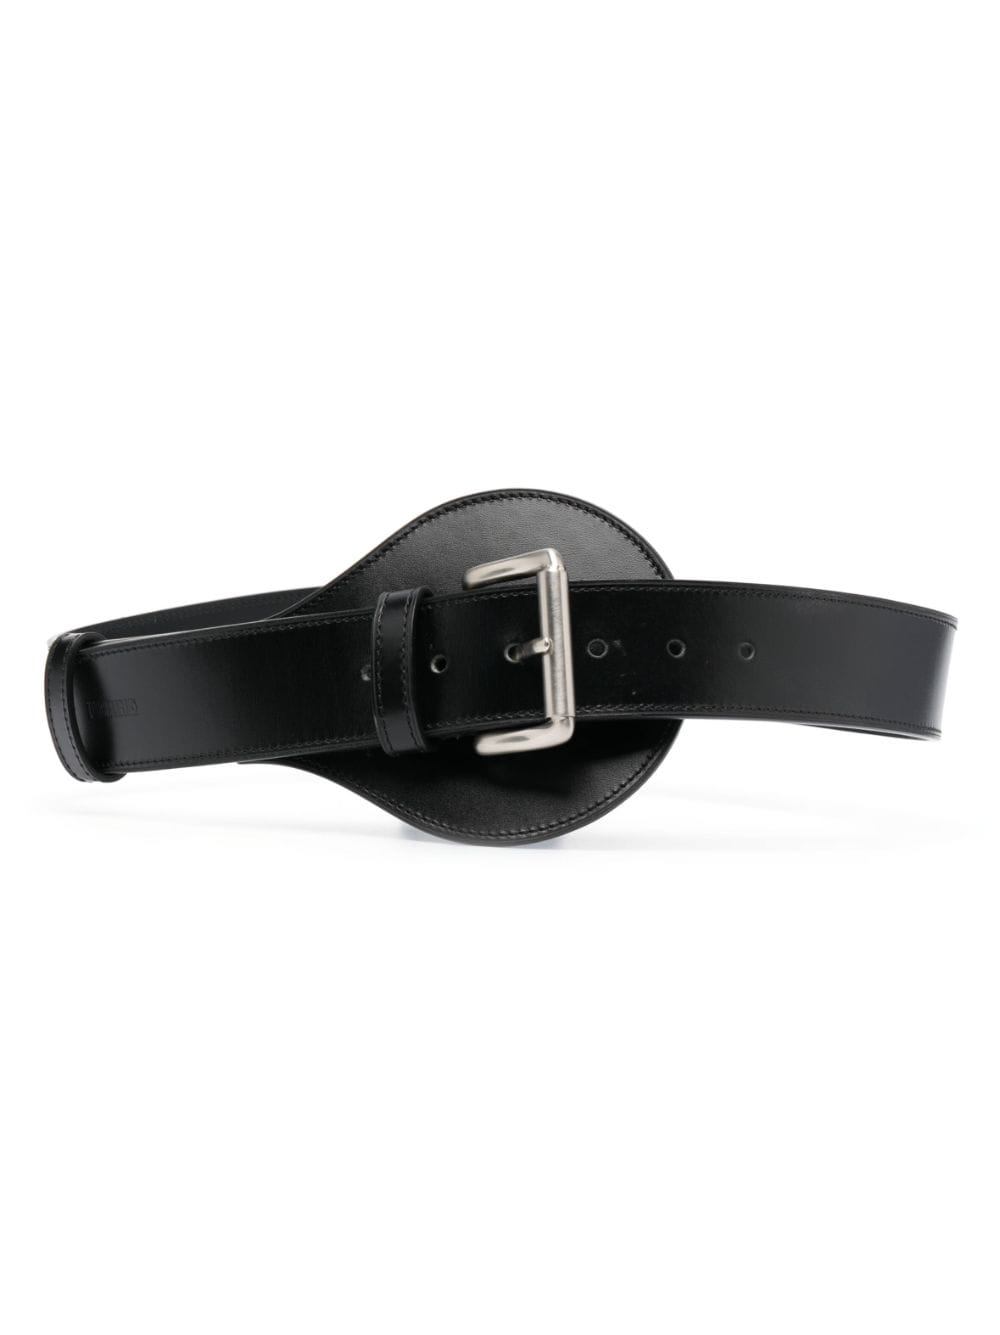 Gianfranco Ferré Pre-Owned 2000s buckled leather belt - Black von Gianfranco Ferré Pre-Owned